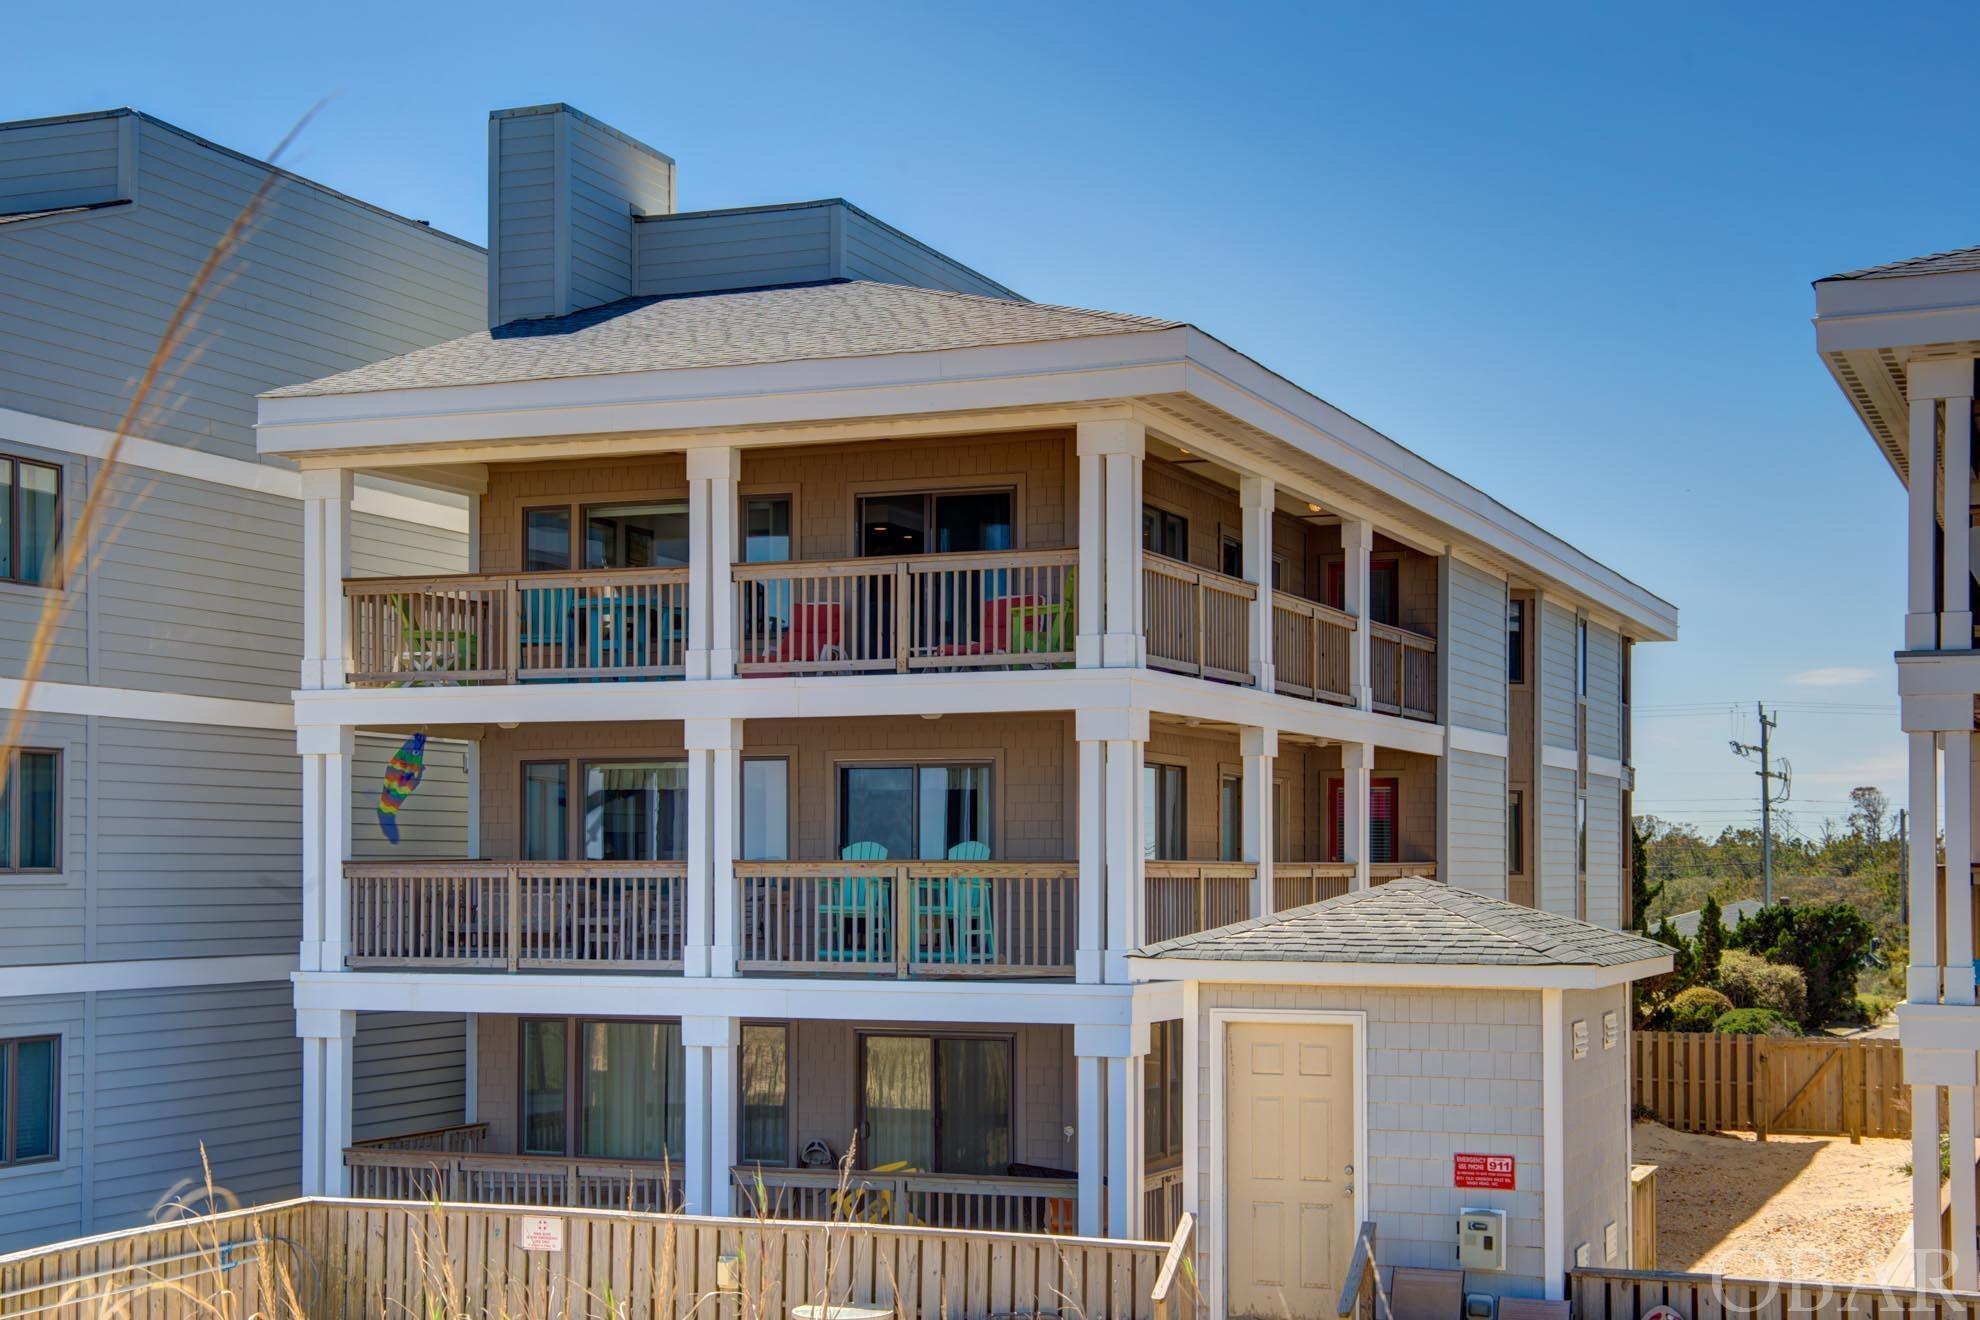 Experience Oceanfront living at its finest in this S. Nags Head condo at Diamond Shoals. This first-floor unit (easy in, easy out) is beautifully maintained with special touches to enhance your comfort during your stay. This three-bed (plus bonus room), two full bath gem has plenty of room to spread out. The kitchen is well equipped, and you'll have plenty of dining space for the whole family. Enjoy the outdoors under the covered deck, or spend the day on the beach or community pool, right outside your door. Ceiling fans and other premium touches throughout make this the perfect getaway. Reach out to your favorite realtor for a private tour!